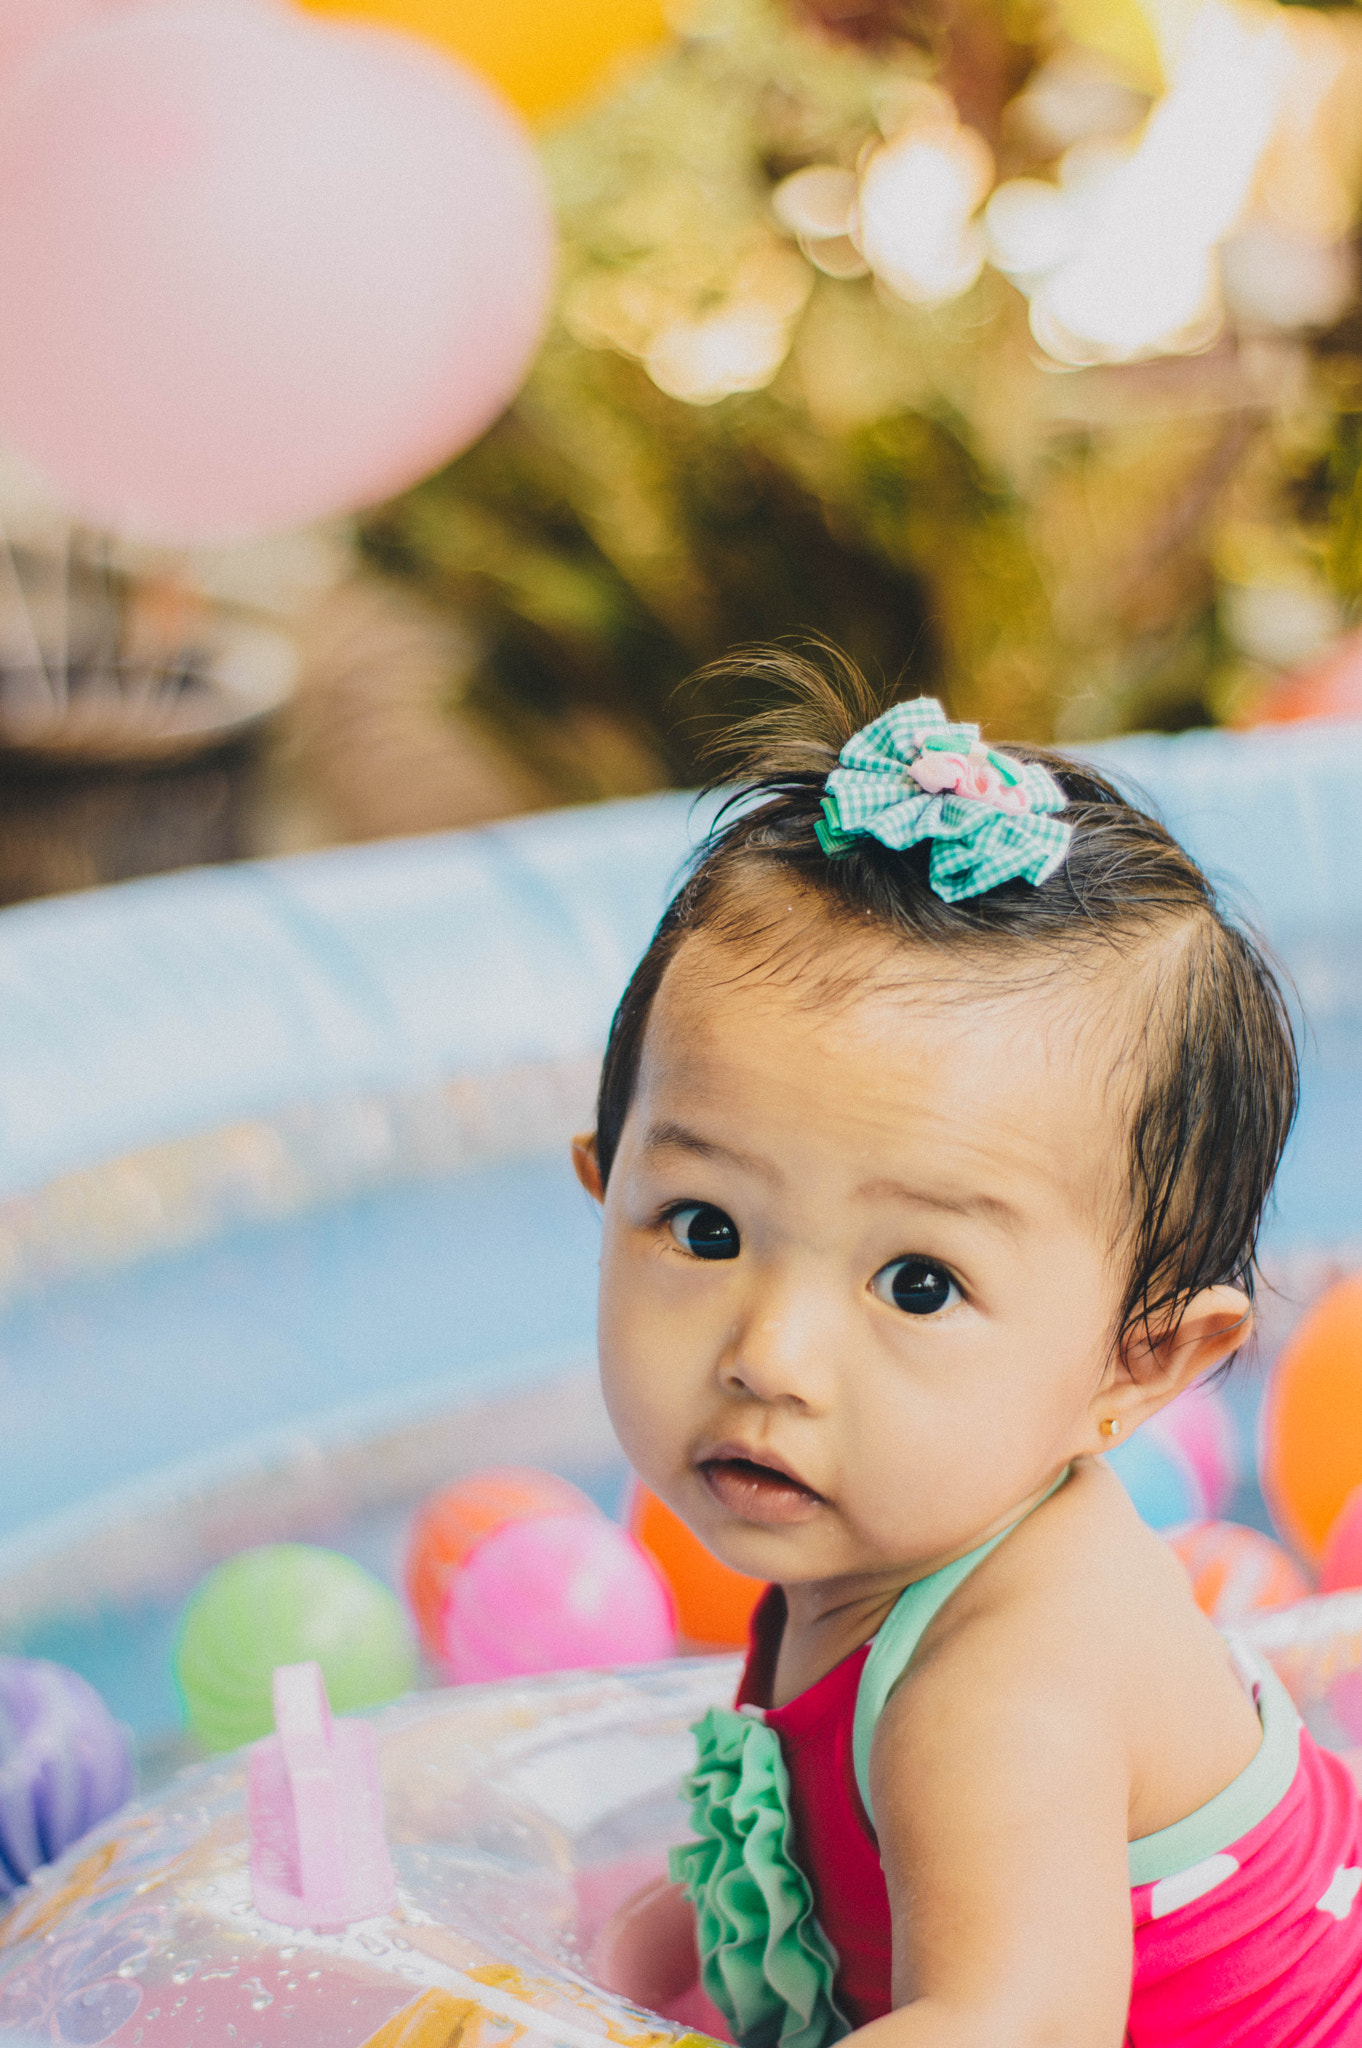 Nikon D3200 + AF-S DX VR Zoom-Nikkor 18-55mm f/3.5-5.6G + 2.8x sample photo. Baby in pool photography